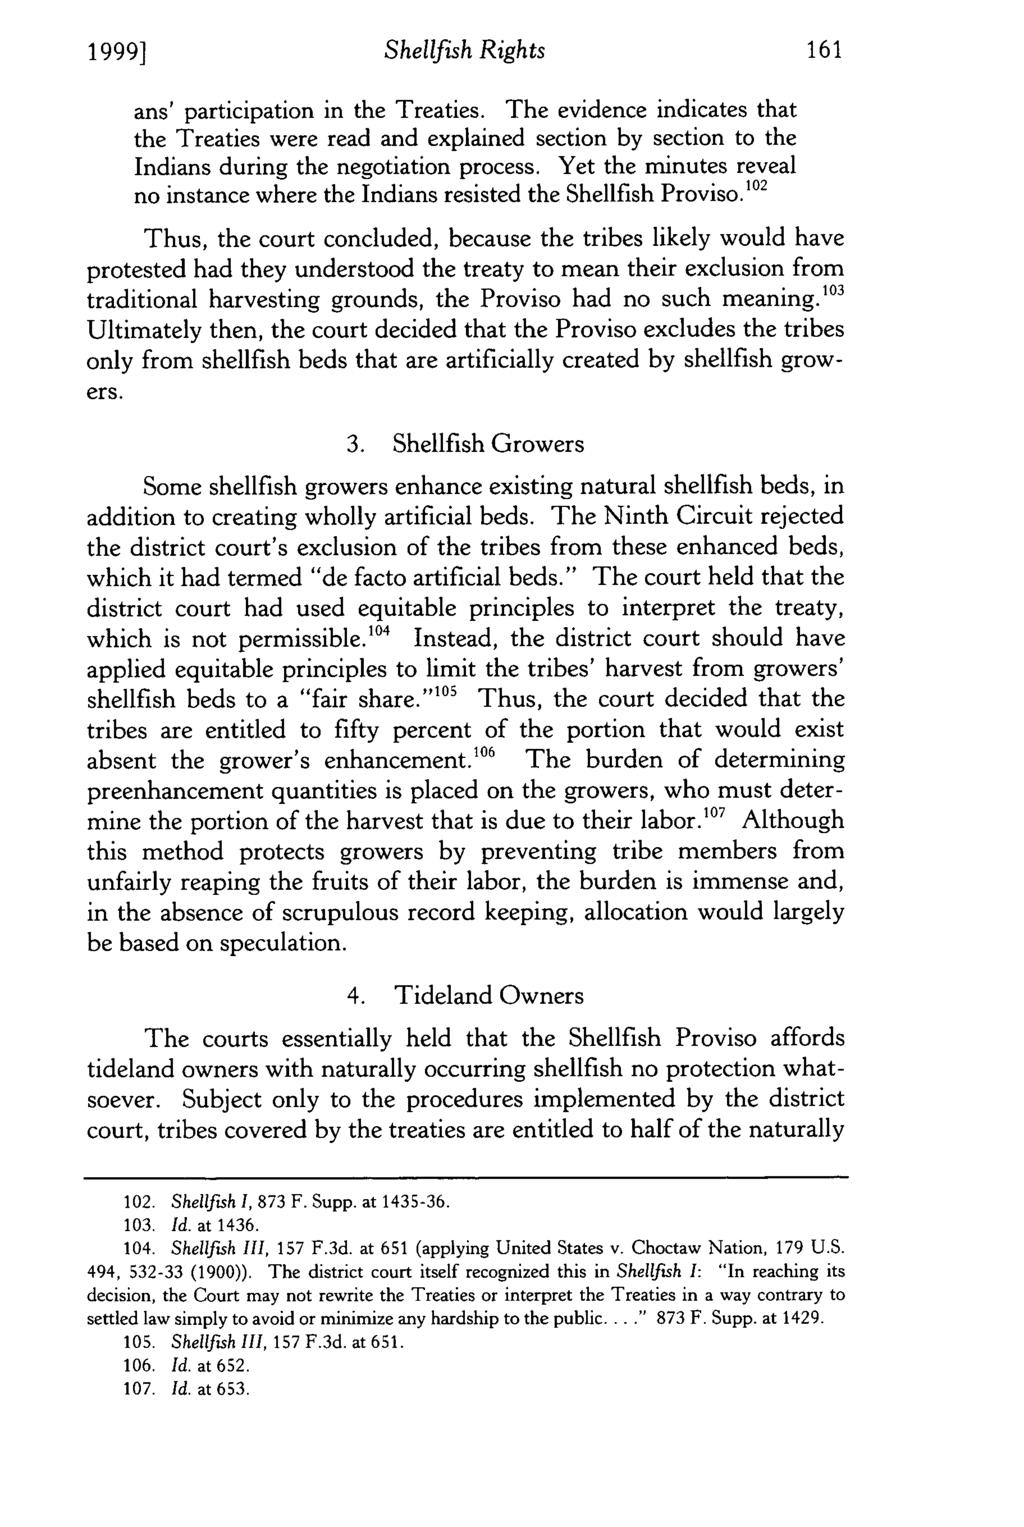 1999] Shellfish Rights ans' participation in the Treaties. The evidence indicates that the Treaties were read and explained section by section to the Indians during the negotiation process.